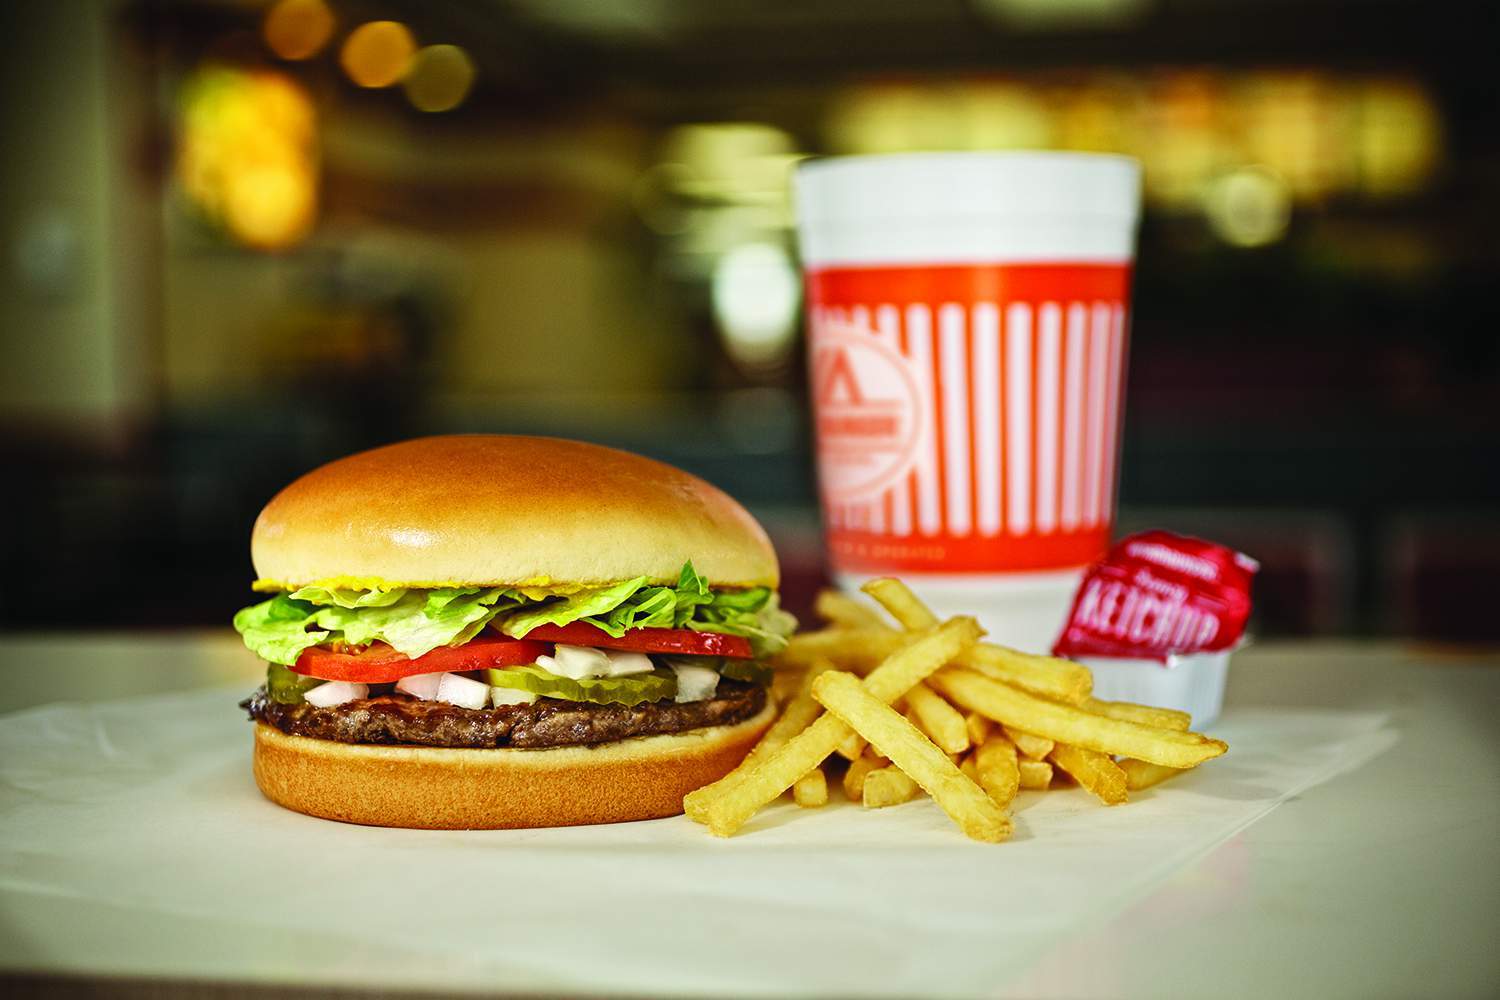 Whataburger offering free burgers with buy-one, get-one deal for 70th anniversary